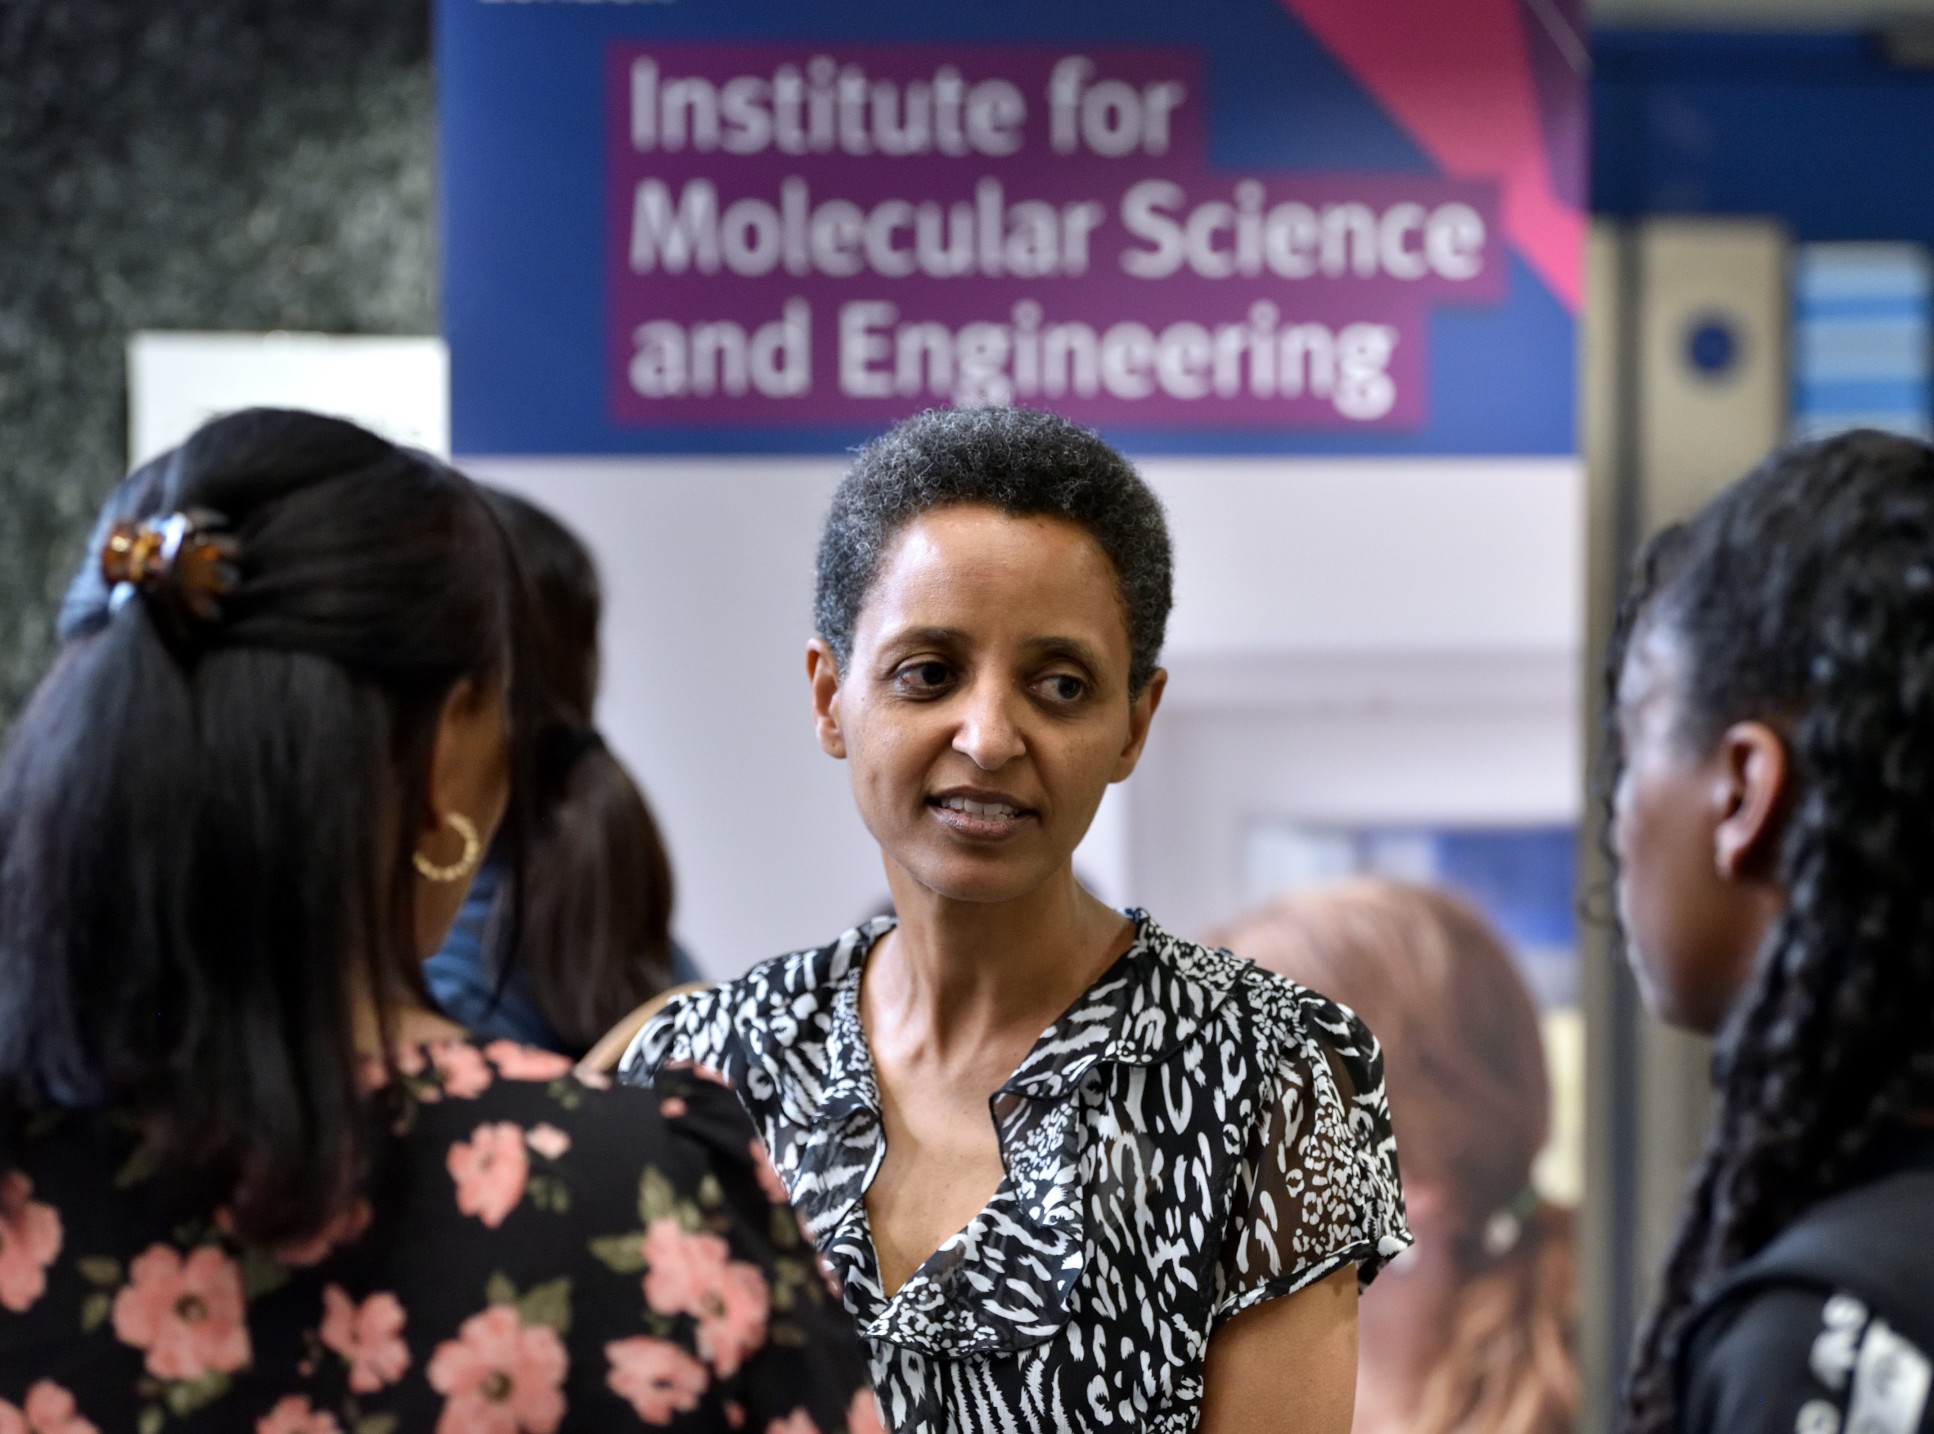 Professor Sossina Haile speaks to students after the 2022 IMSE Annual Conference